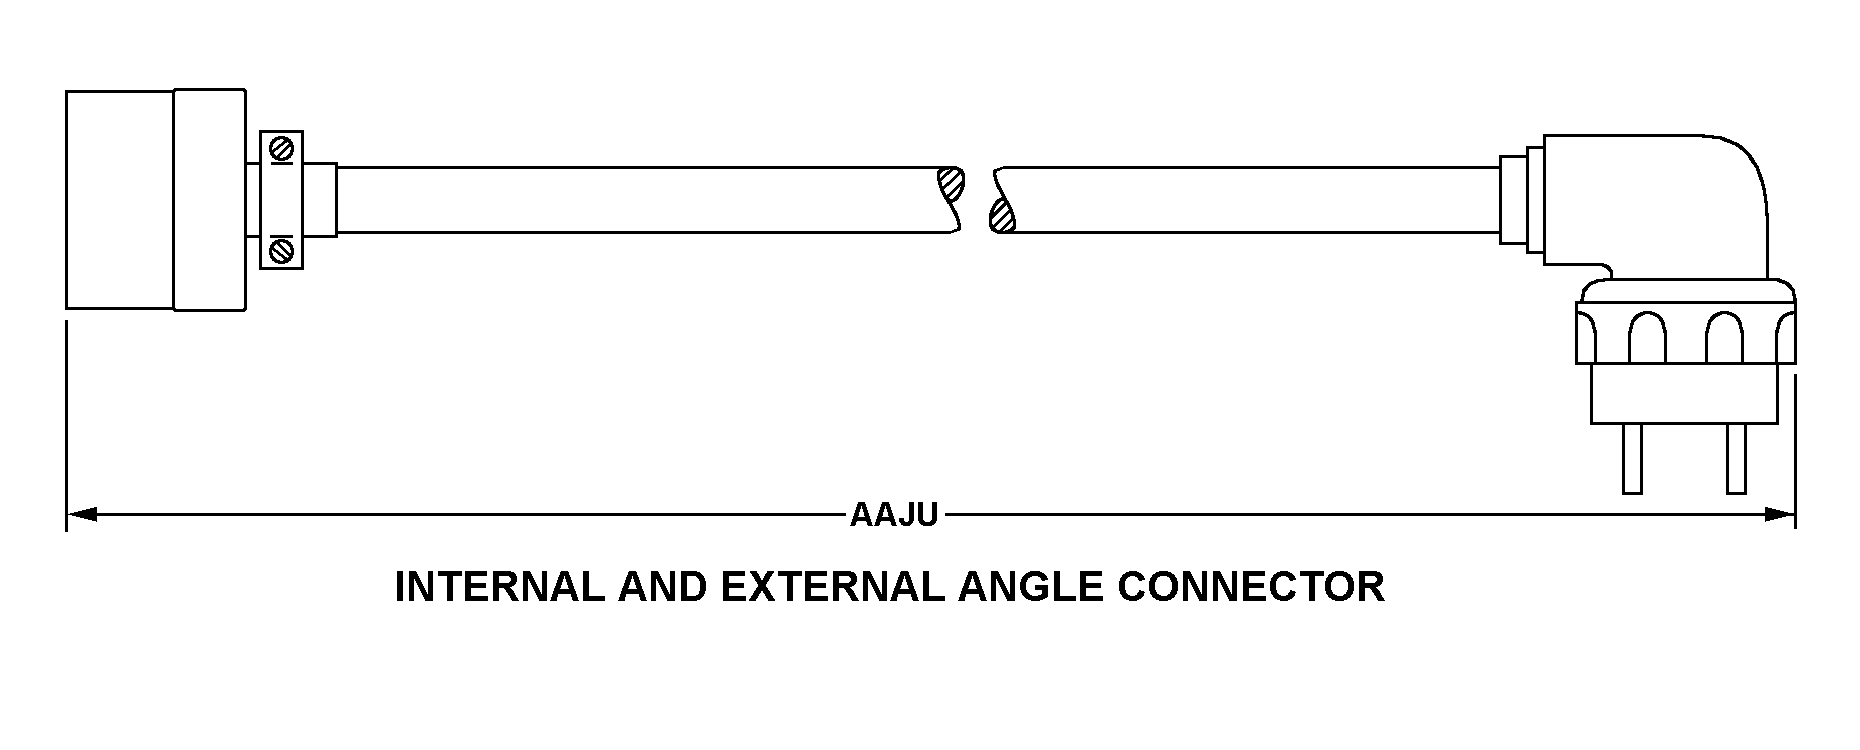 INTERNAL AND EXTERNAL ANGLE CONNECTOR style nsn 5995-01-073-6779